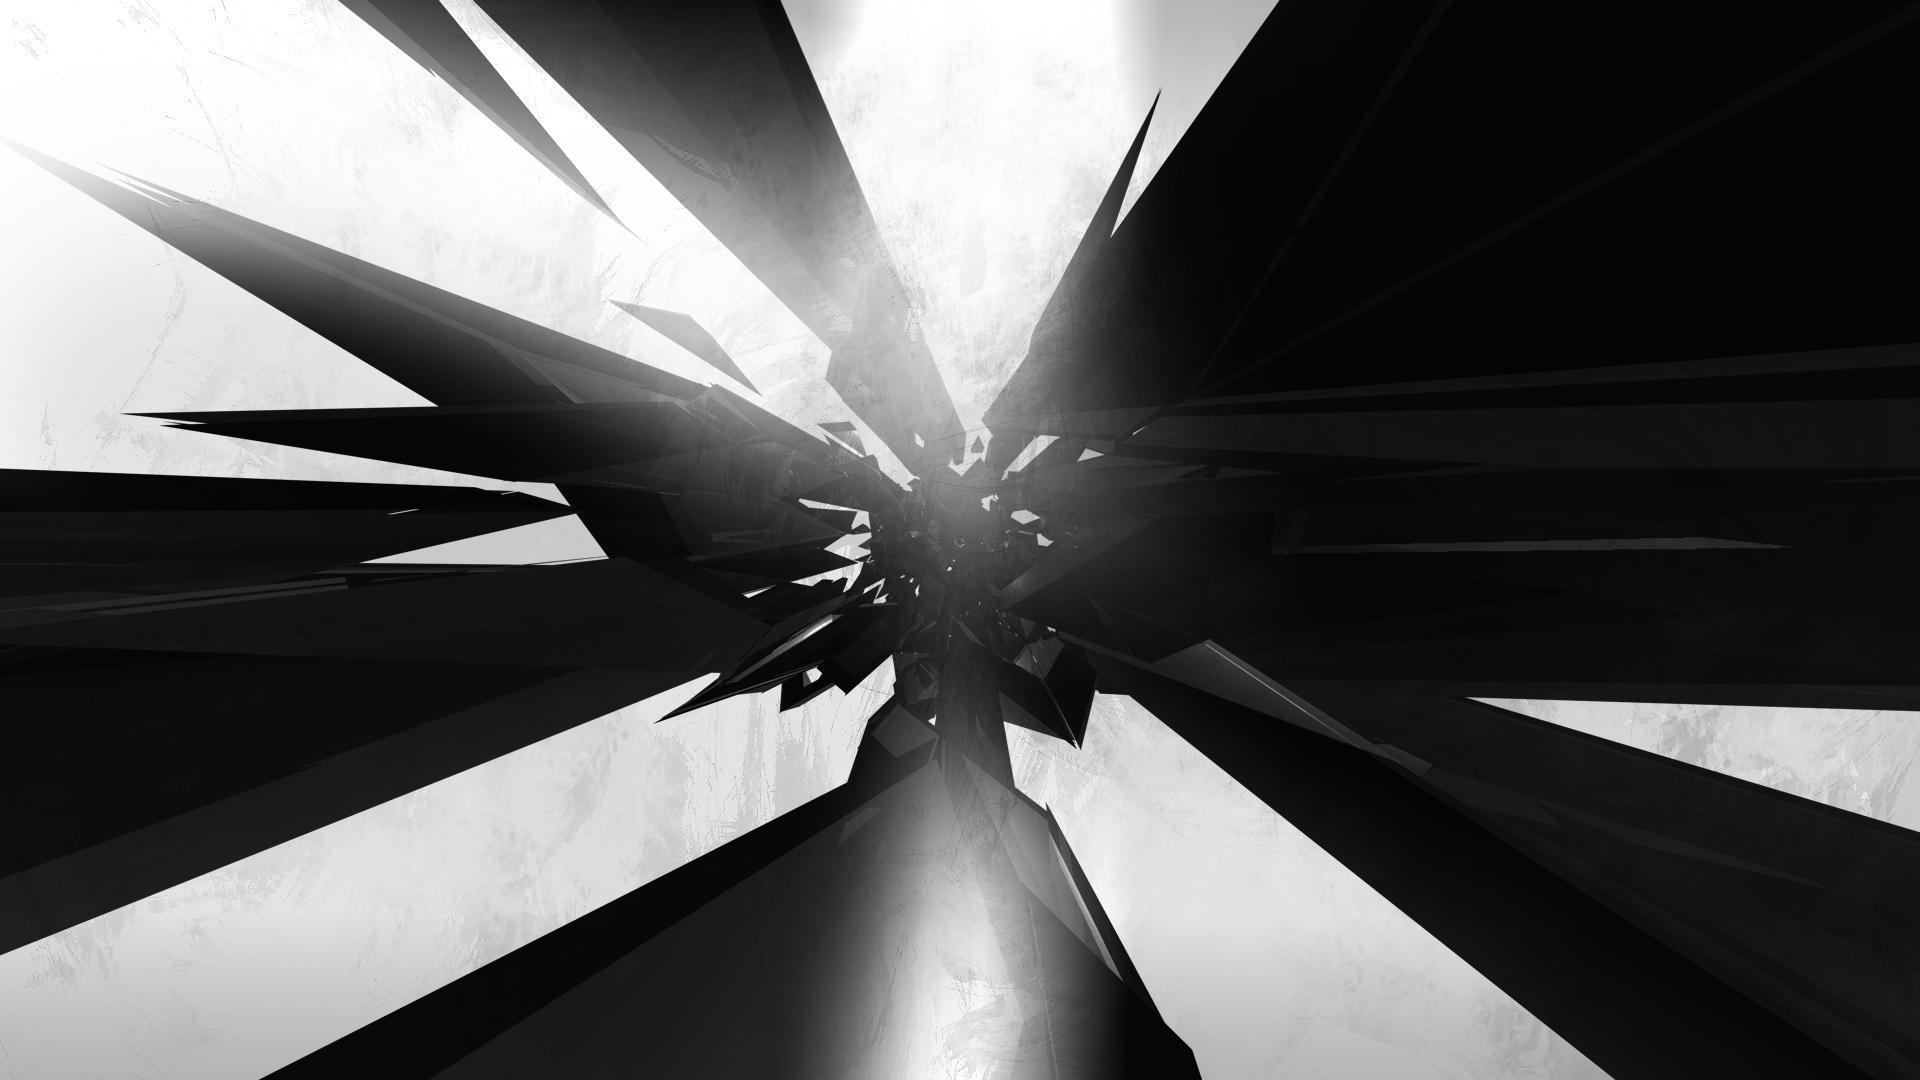 Another Black And White Abstract Wallpaper 12321 Full HD Wallpaper